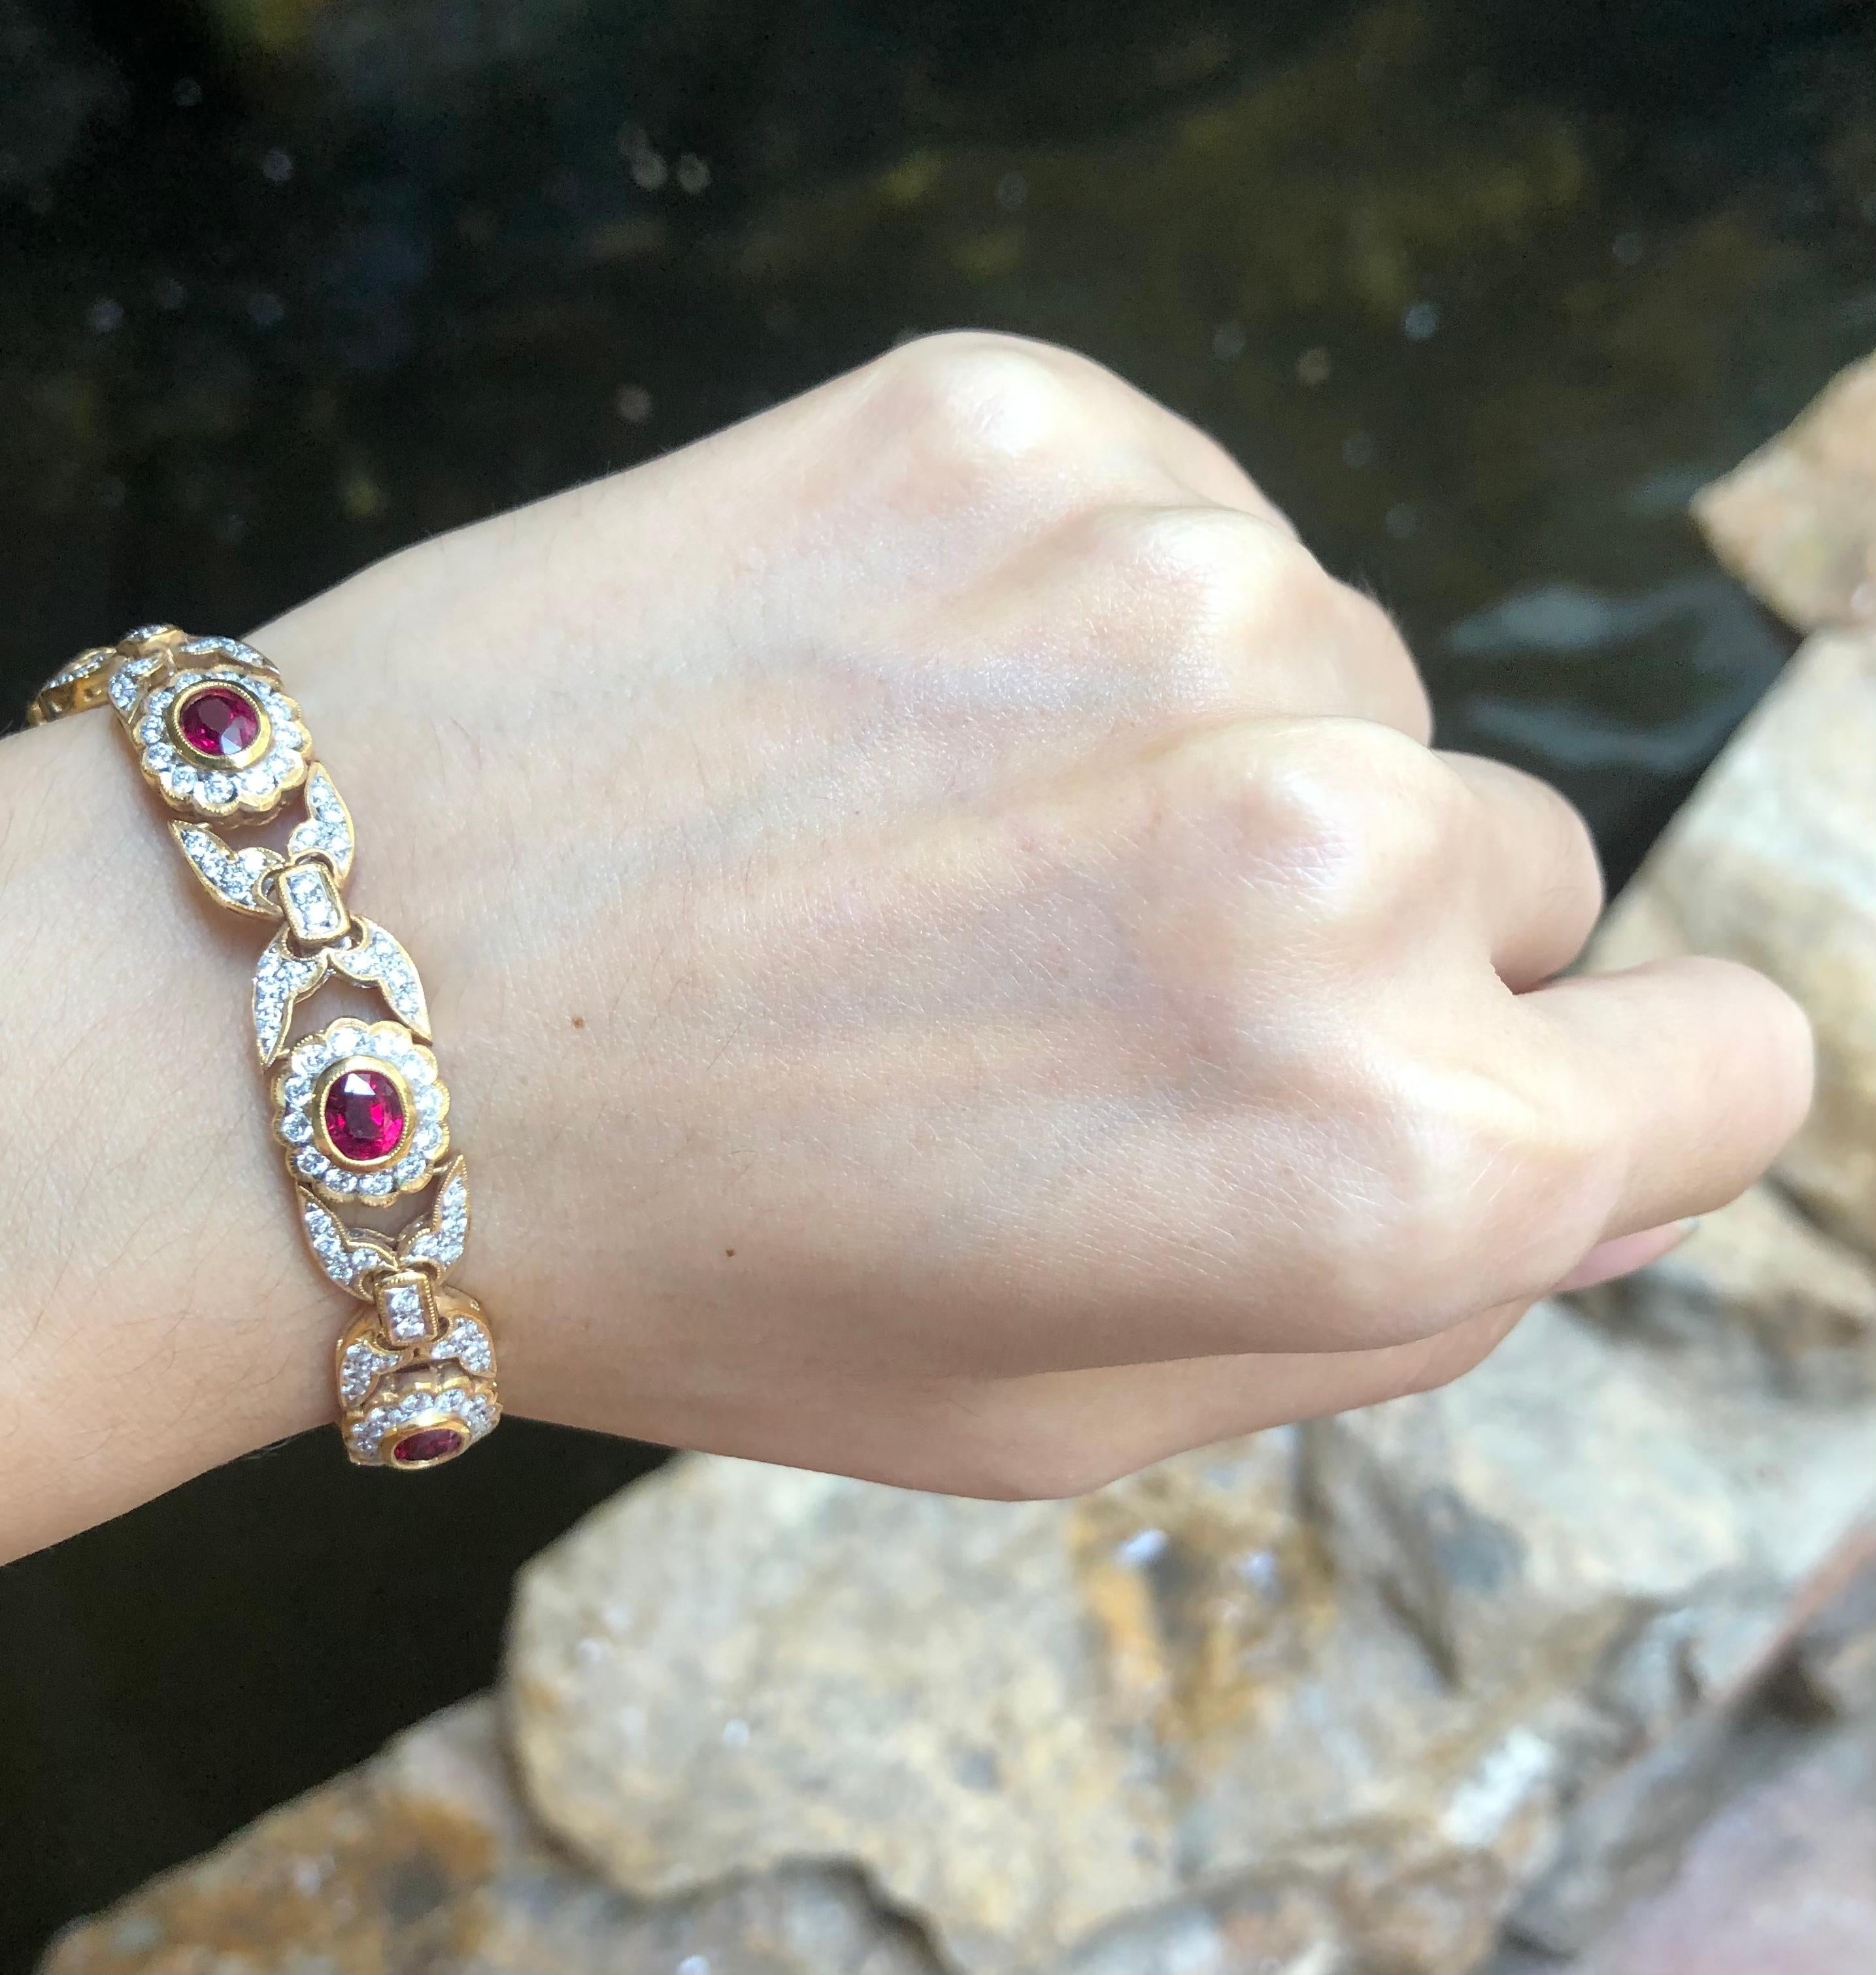 Ruby 4.58 carats with Diamond 3.44 carats Bracelet set in 18 Karat Gold Settings

Width:  1.0 cm 
Length: 18.0 cm
Total Weight: 28.18 grams

